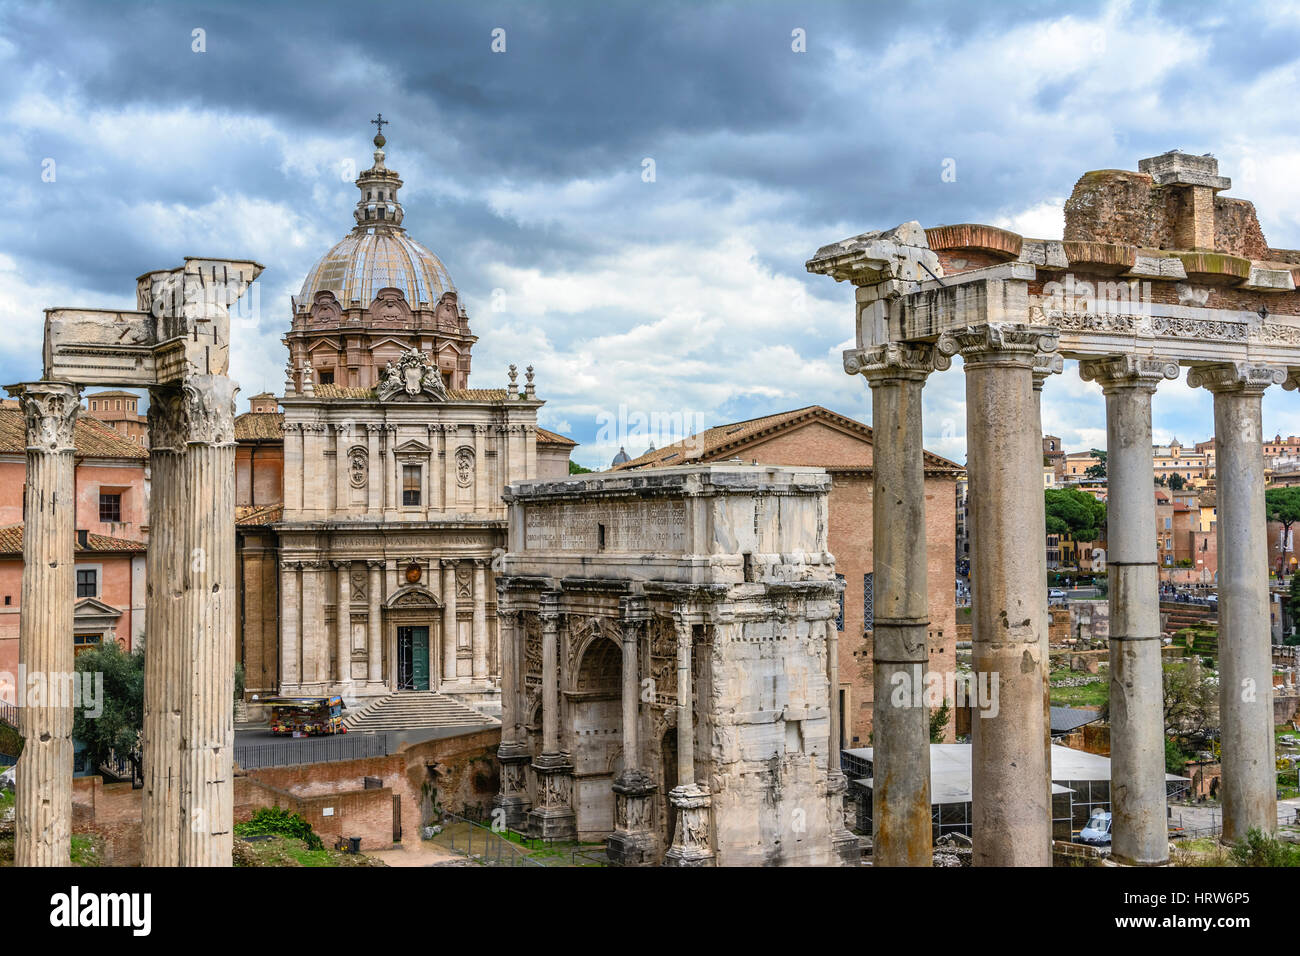 View over the ancient Forum of Rome showing temples, pillars, the senate and ancient streets Stock Photo